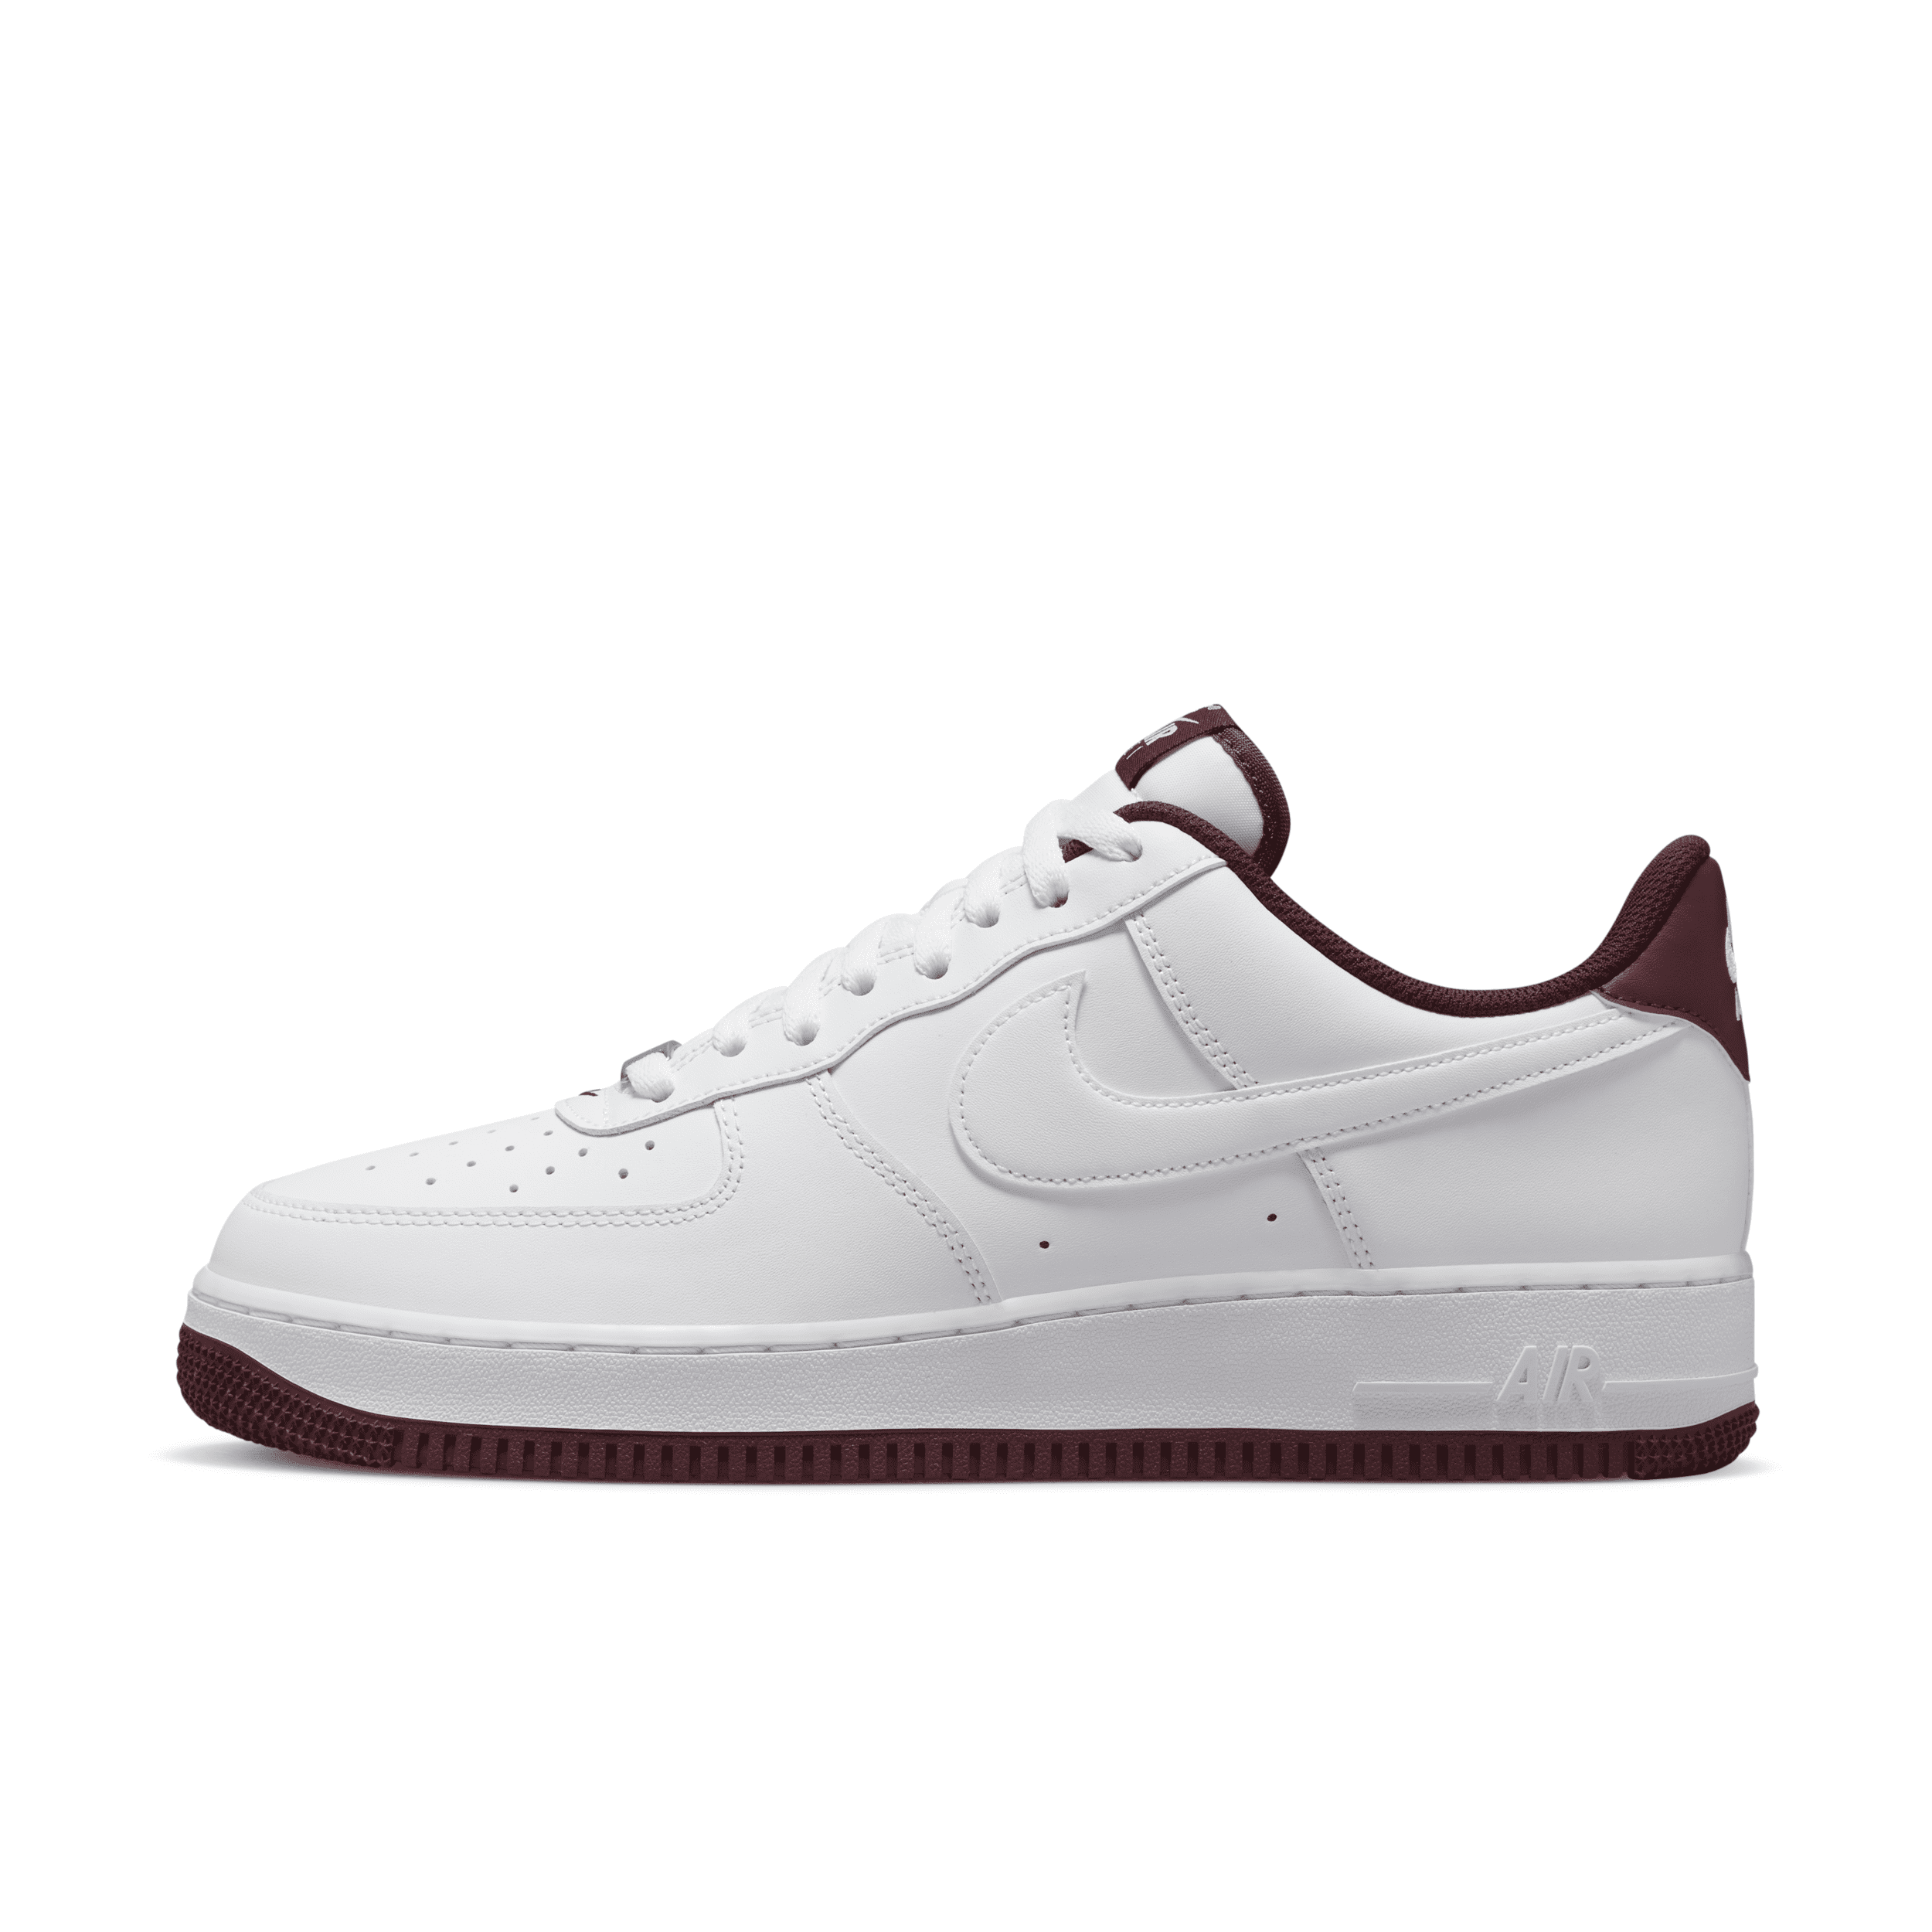 NIKE MEN'S AIR FORCE 1 '07 SHOES,14244026